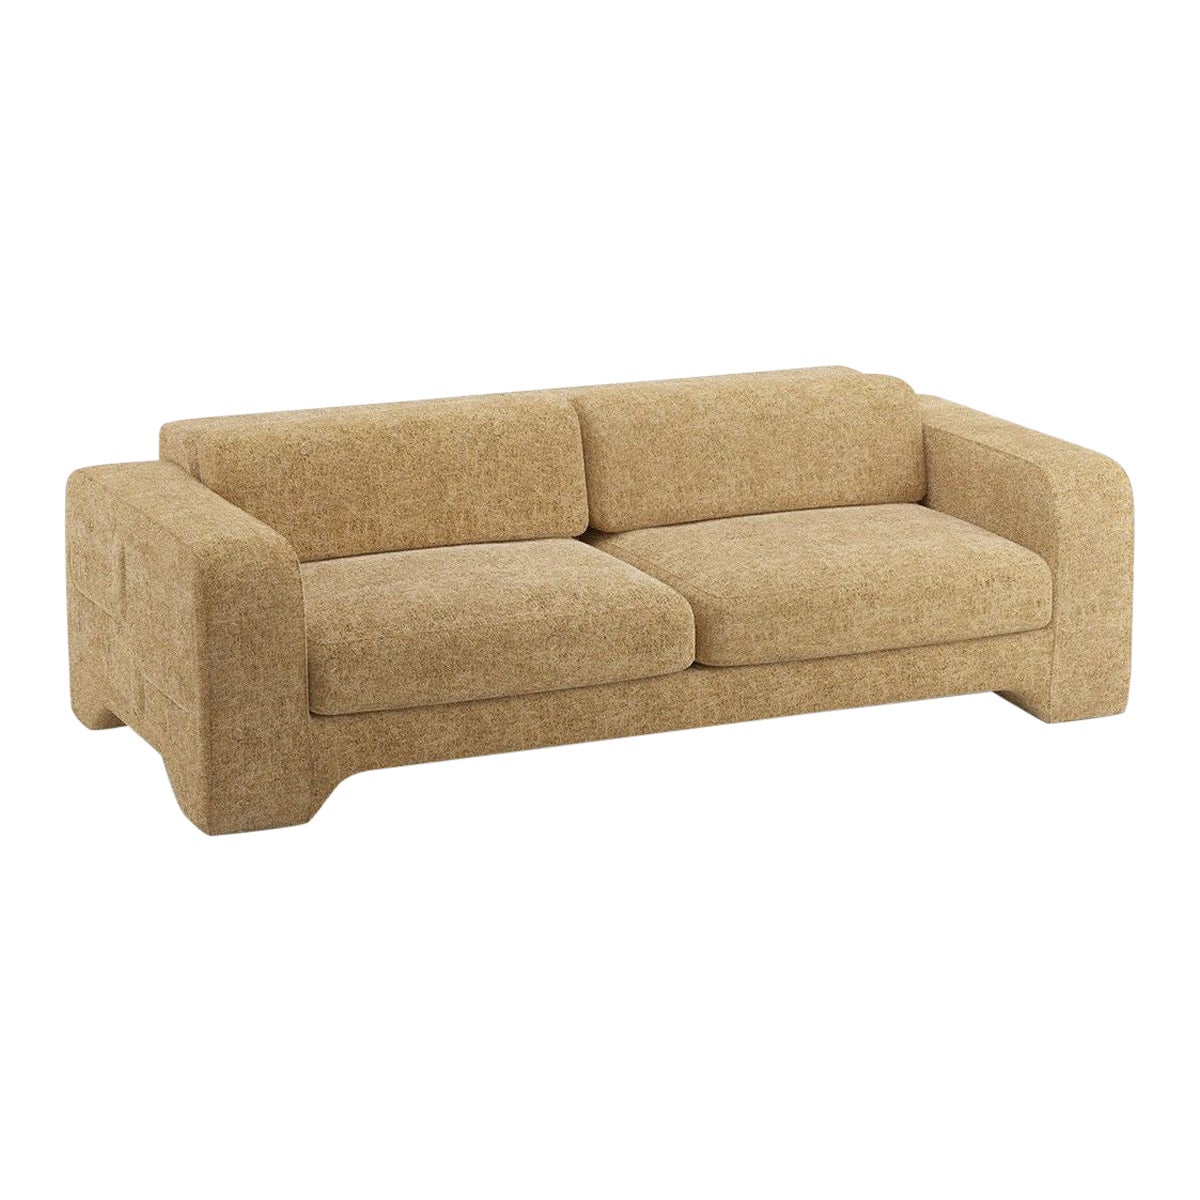 Popus Editions Giovanna 4 Seater Sofa in Ocher London Linen Fabric For Sale